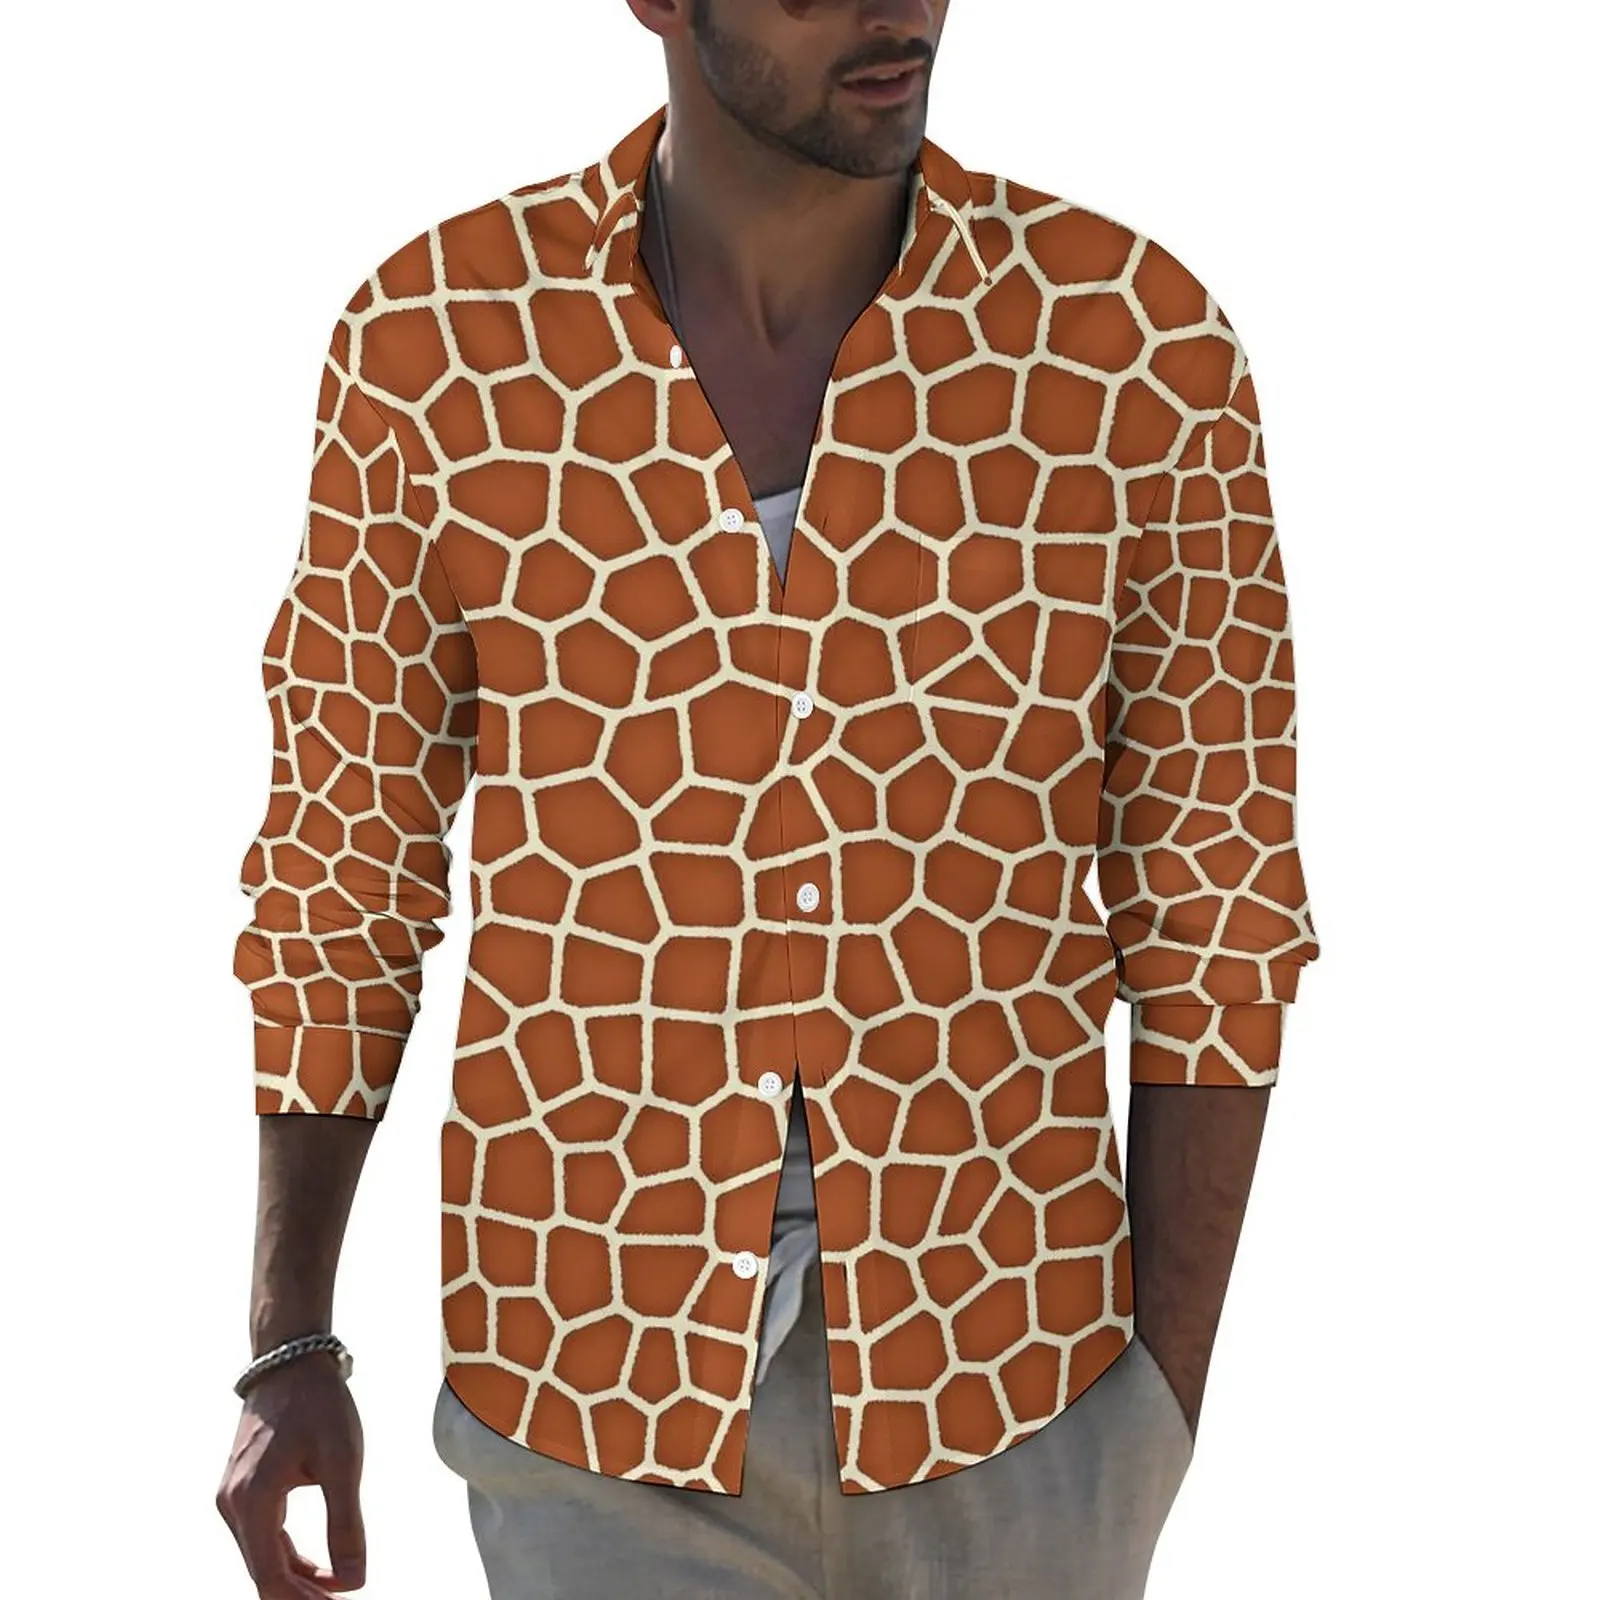 

Giraffe in Shades Aesthetic Casual Shirt Male Animal Print Shirt Autumn Cool Blouses Long Sleeve Design Oversized Tops